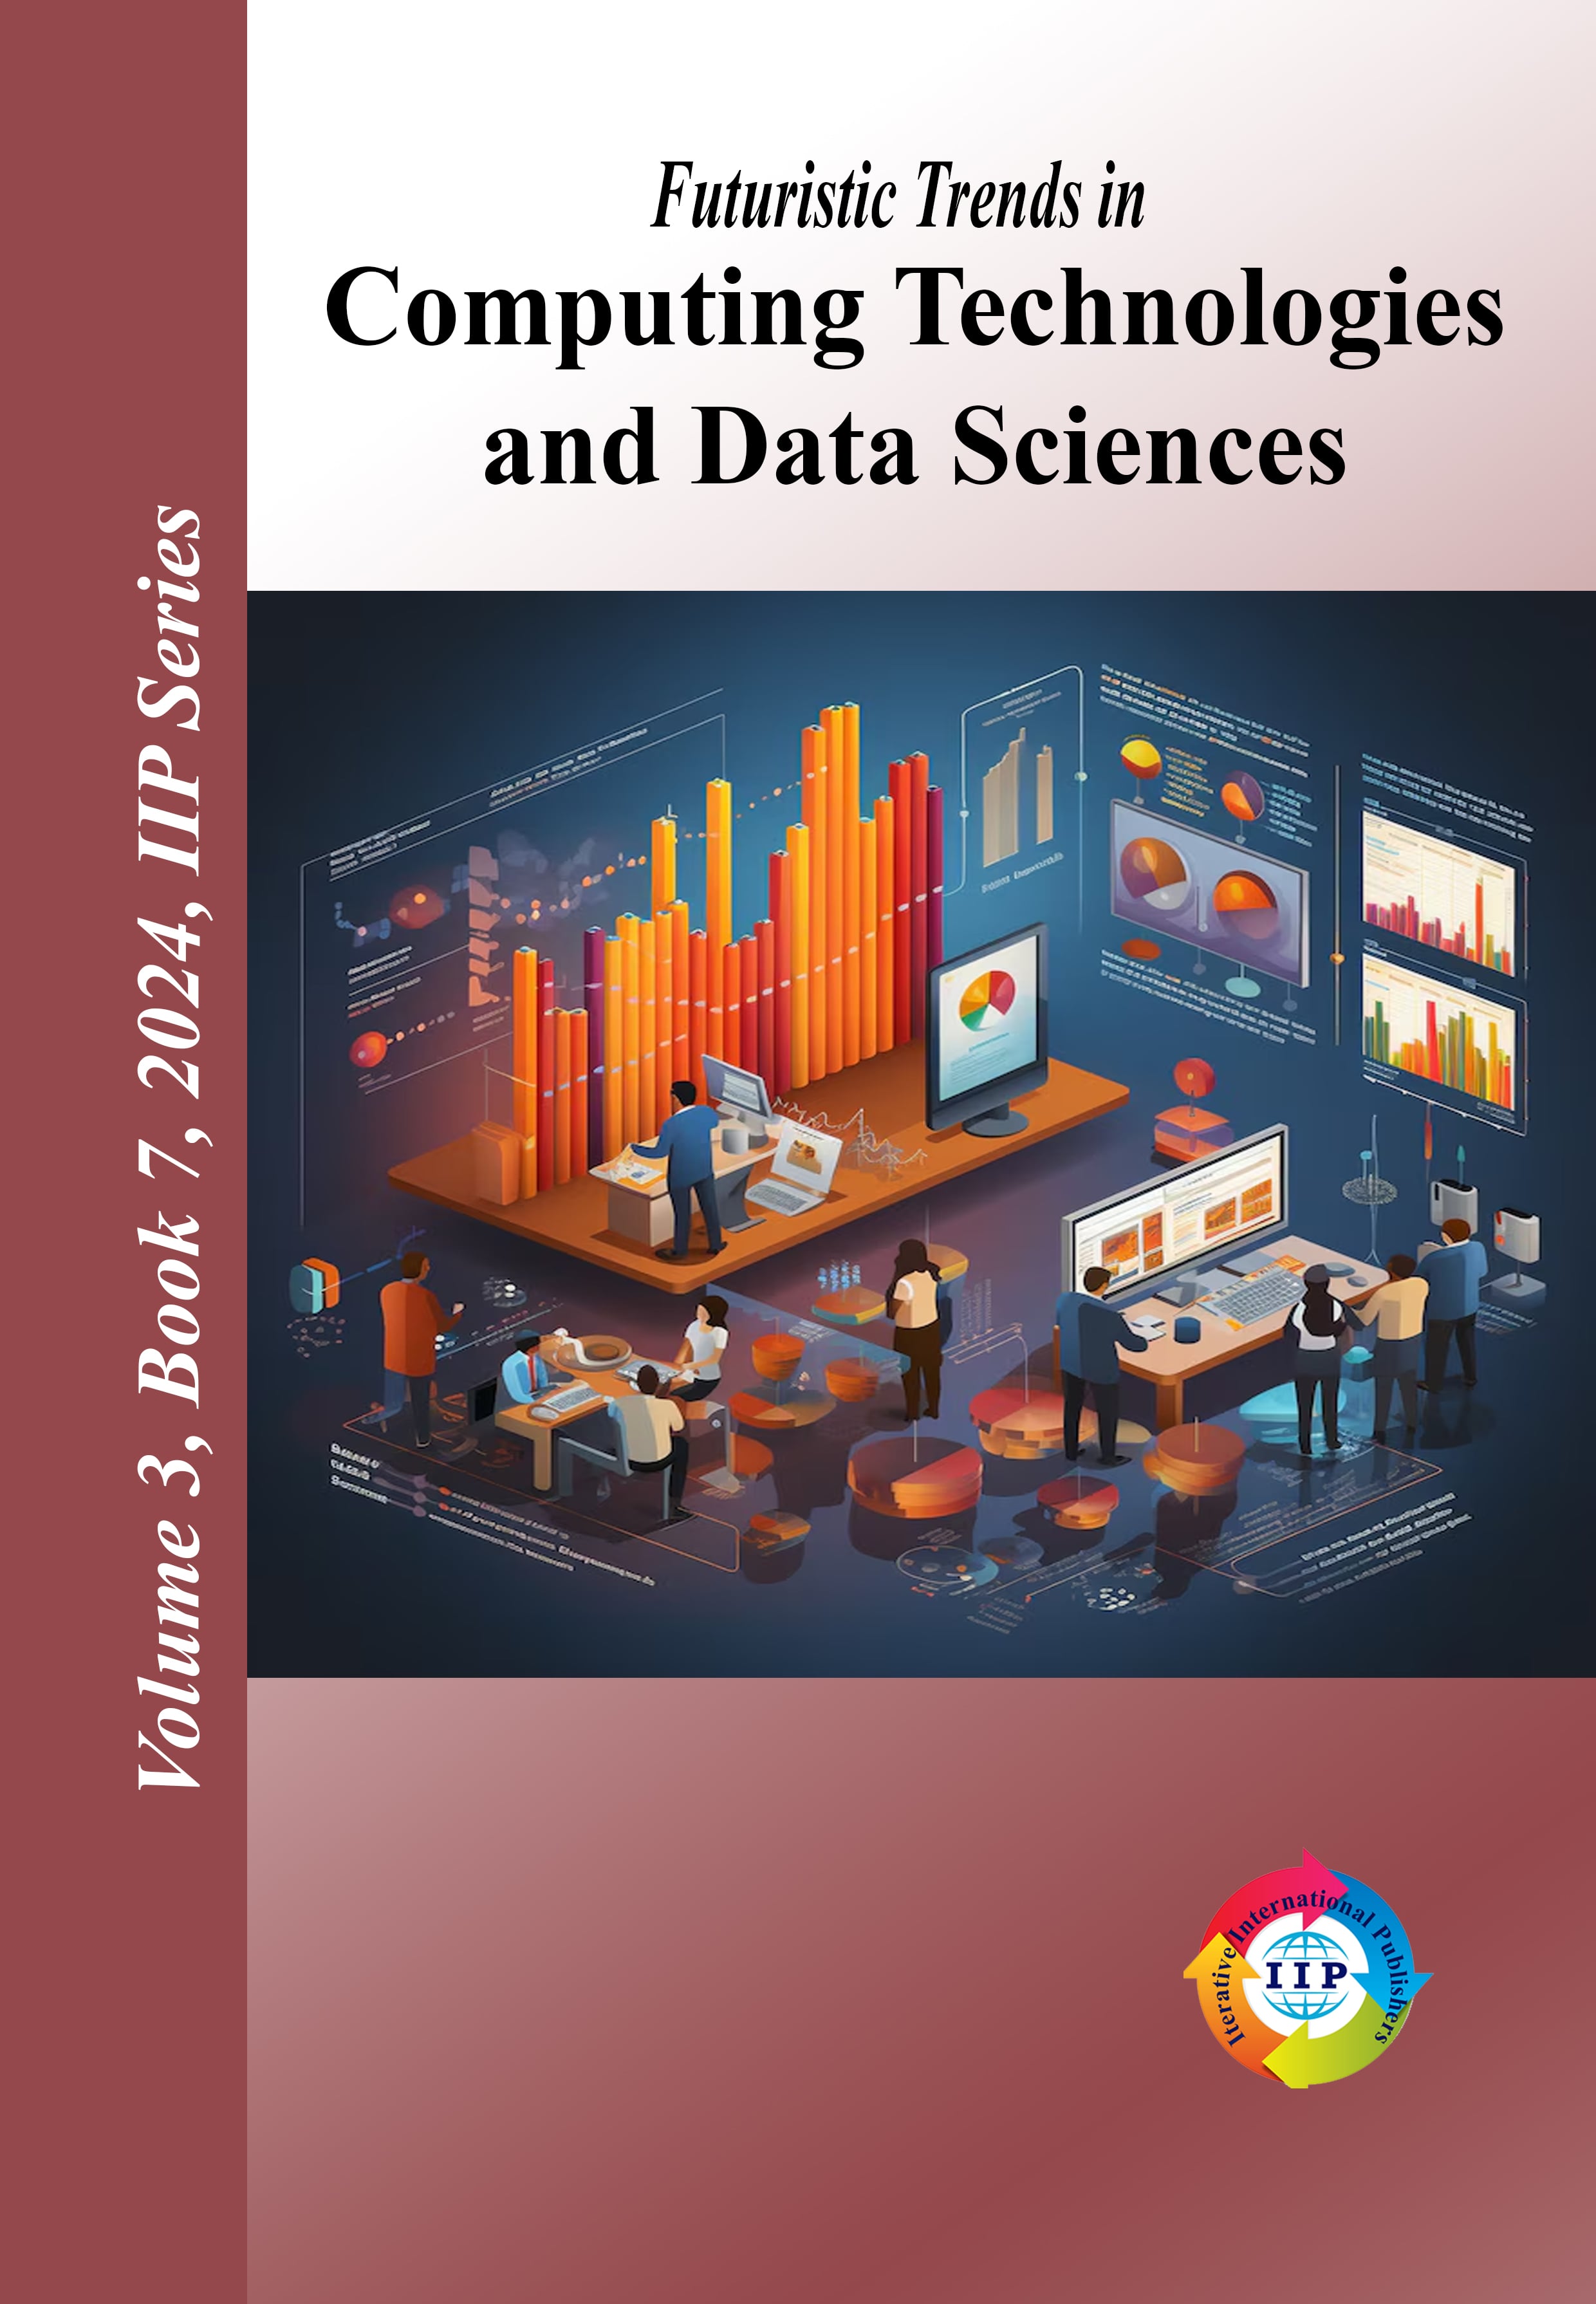 Futuristic Trends in Computing Technologies and Data Sciences Volume 3 Book 7